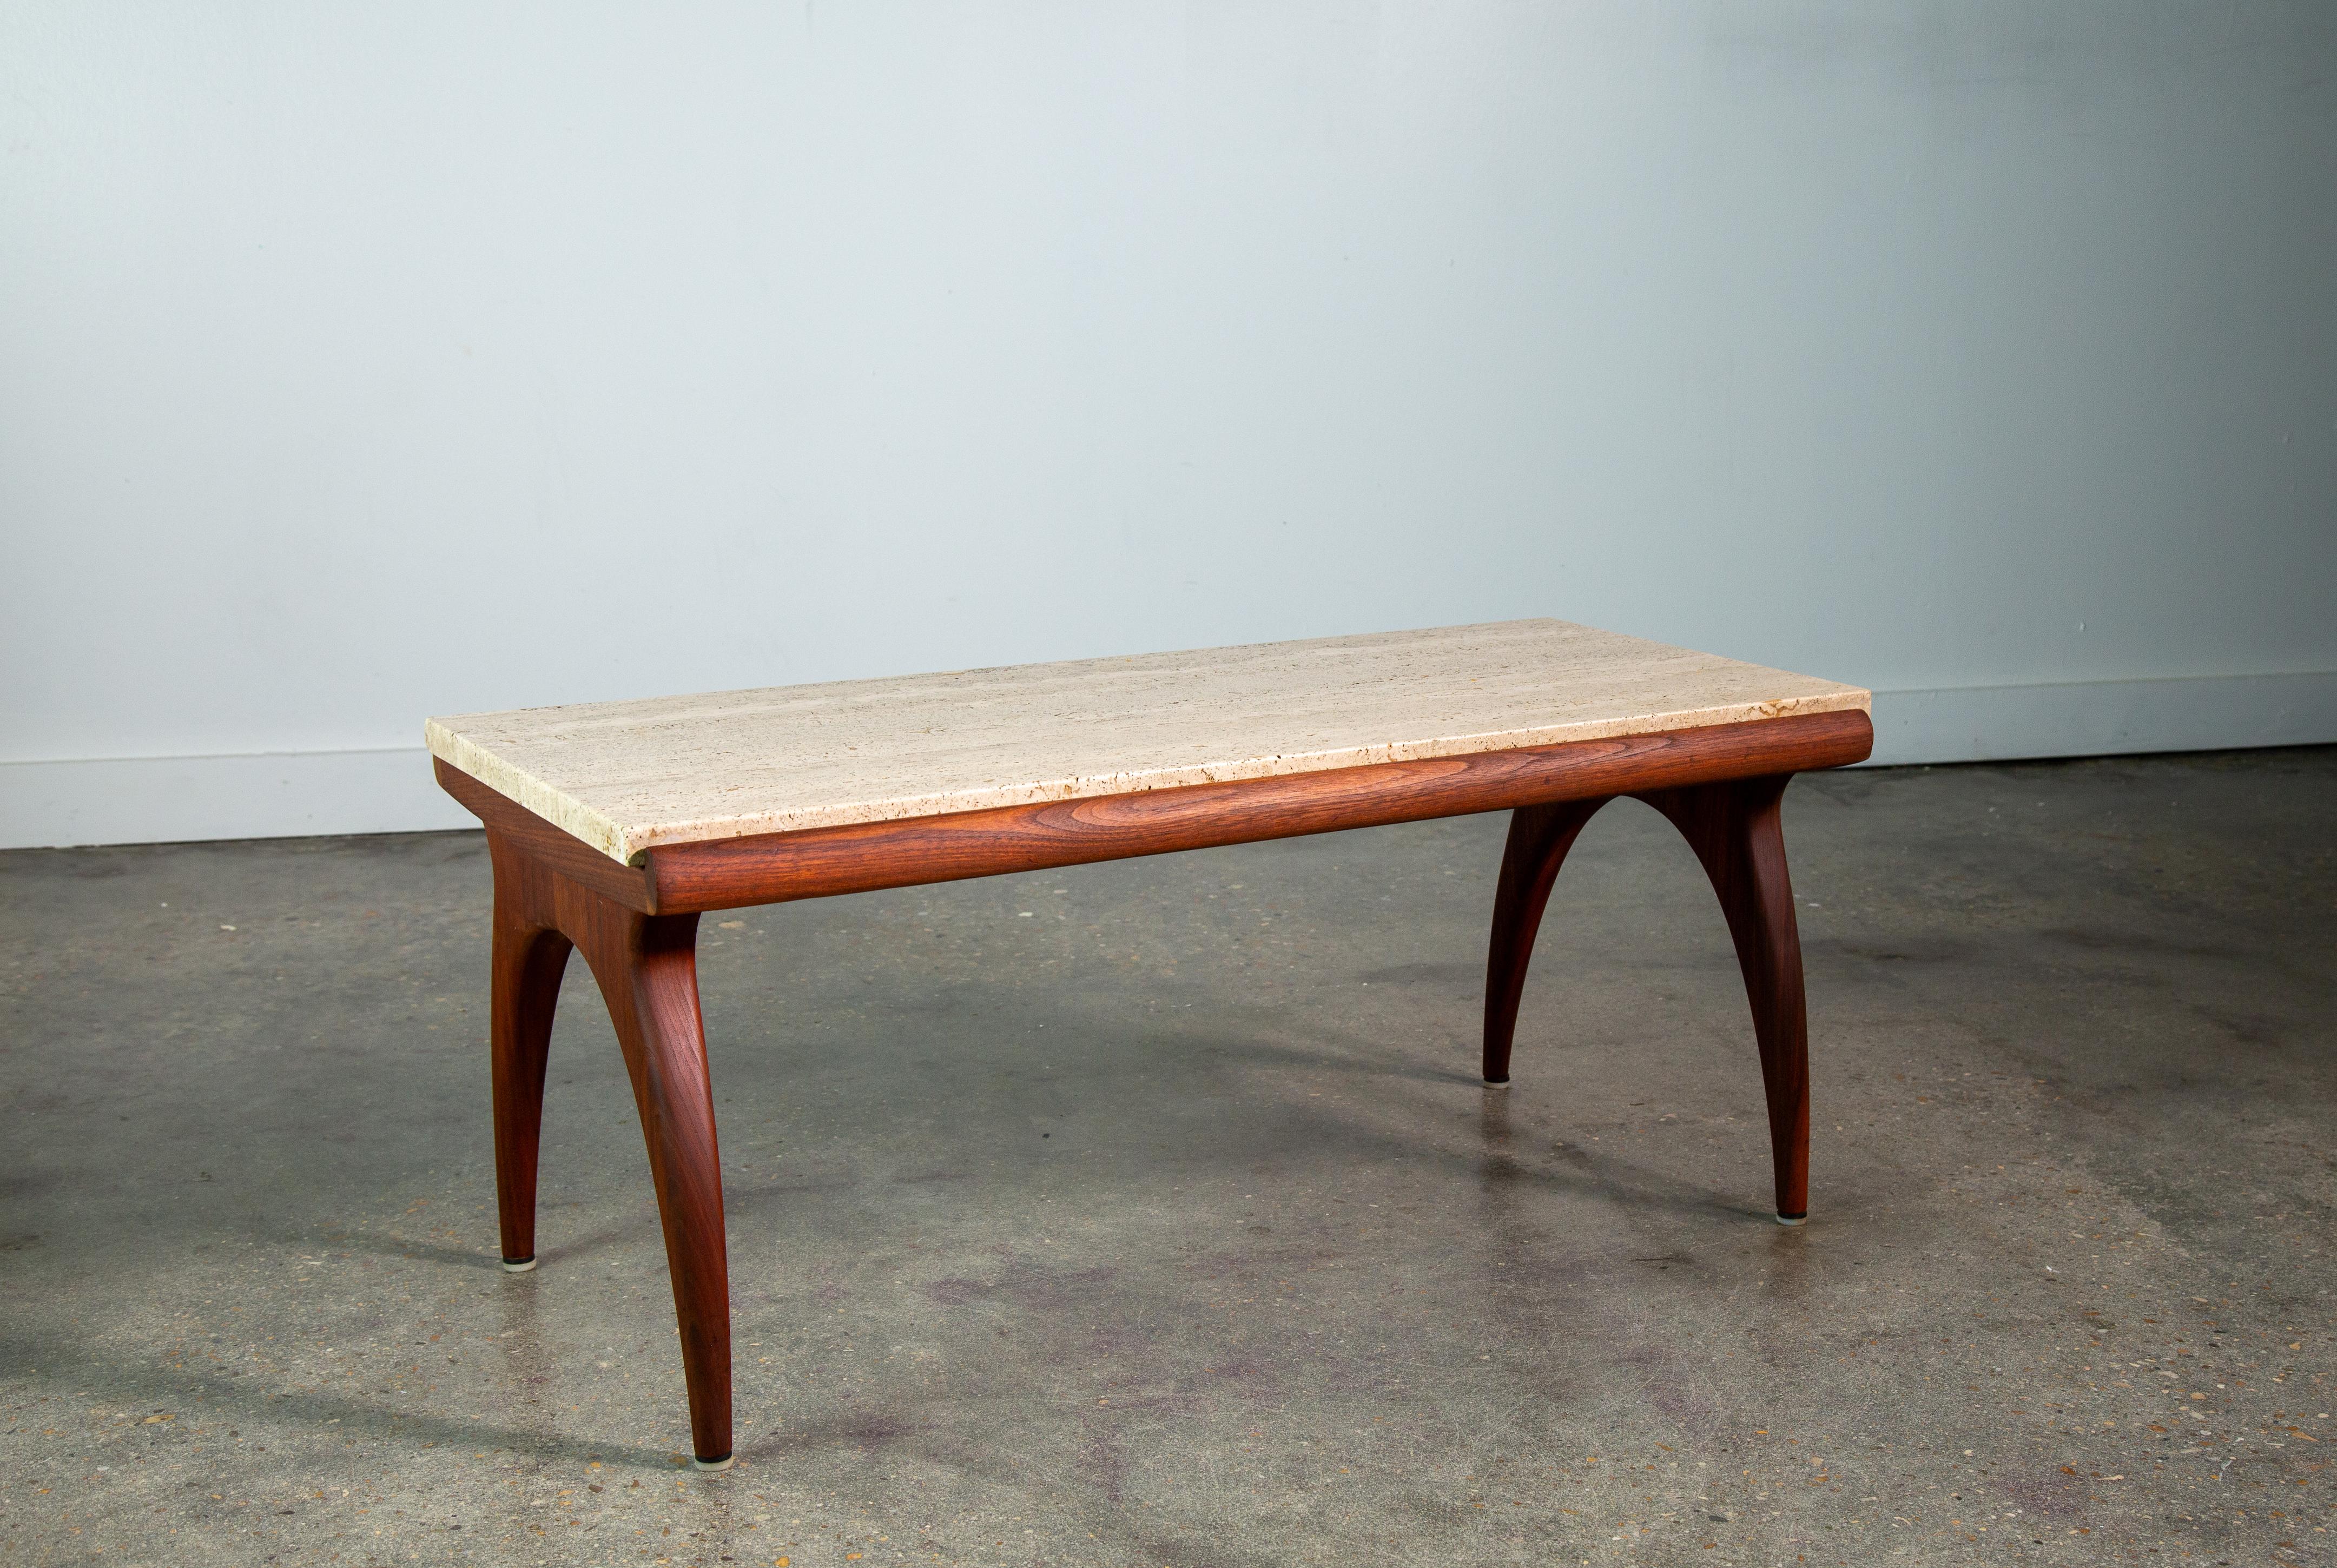 1950s Bertha Schaefer for M. Singer Sons Walnut and Travertine Coffee Table For Sale 6